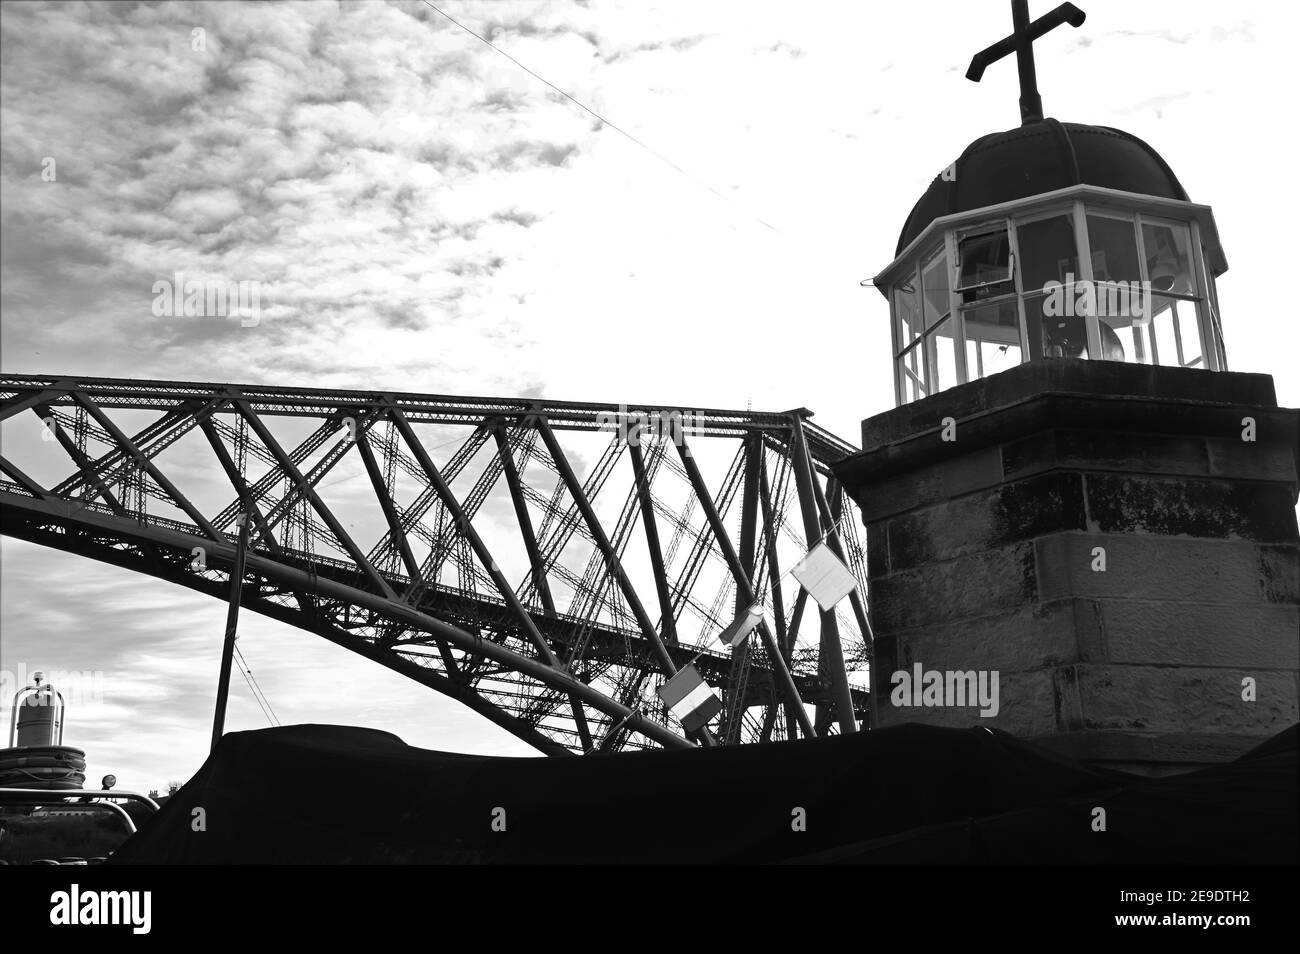 A view of the historic and iconic Forth rail bridge which spans the Forth Estuary in Scotland. Stock Photo